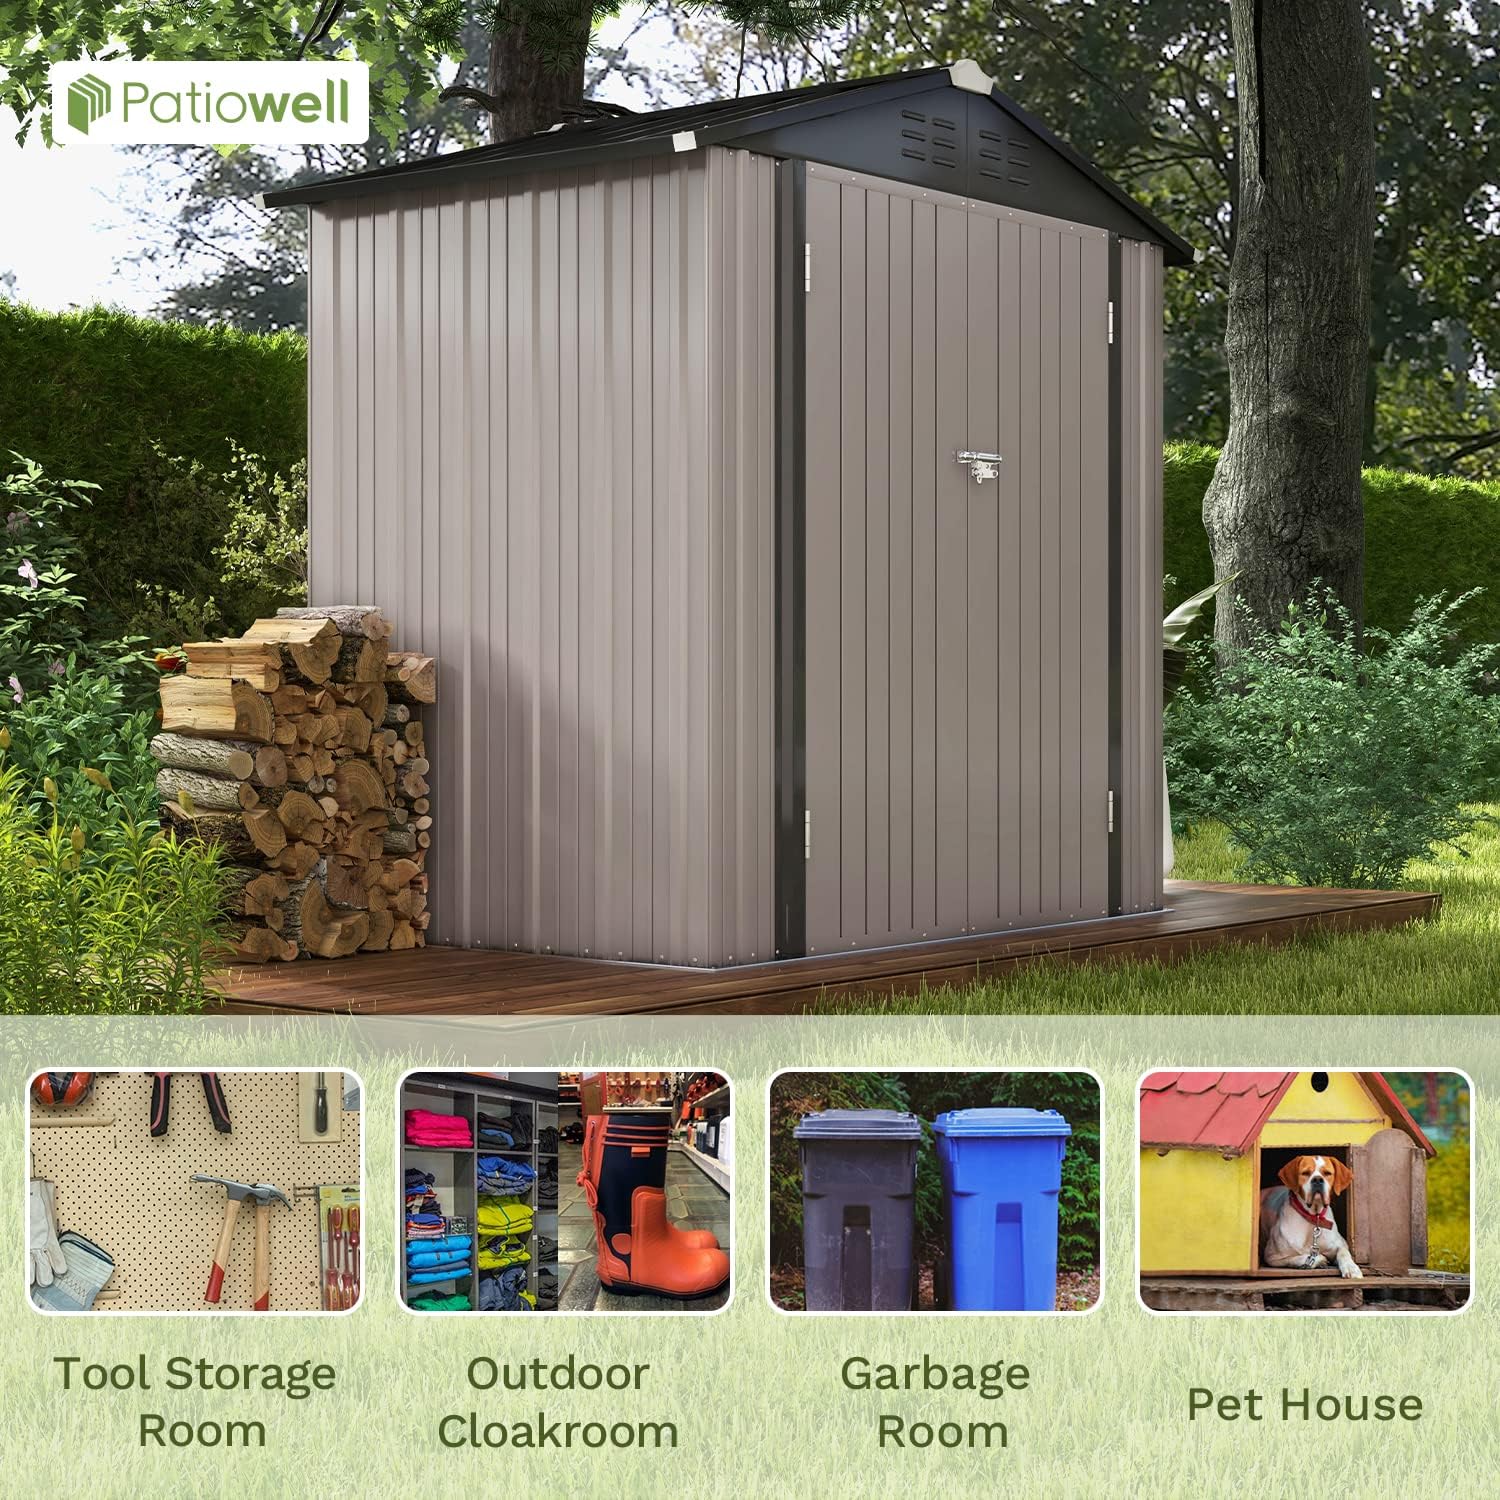 Patiowell 6x4 Storage Shed features